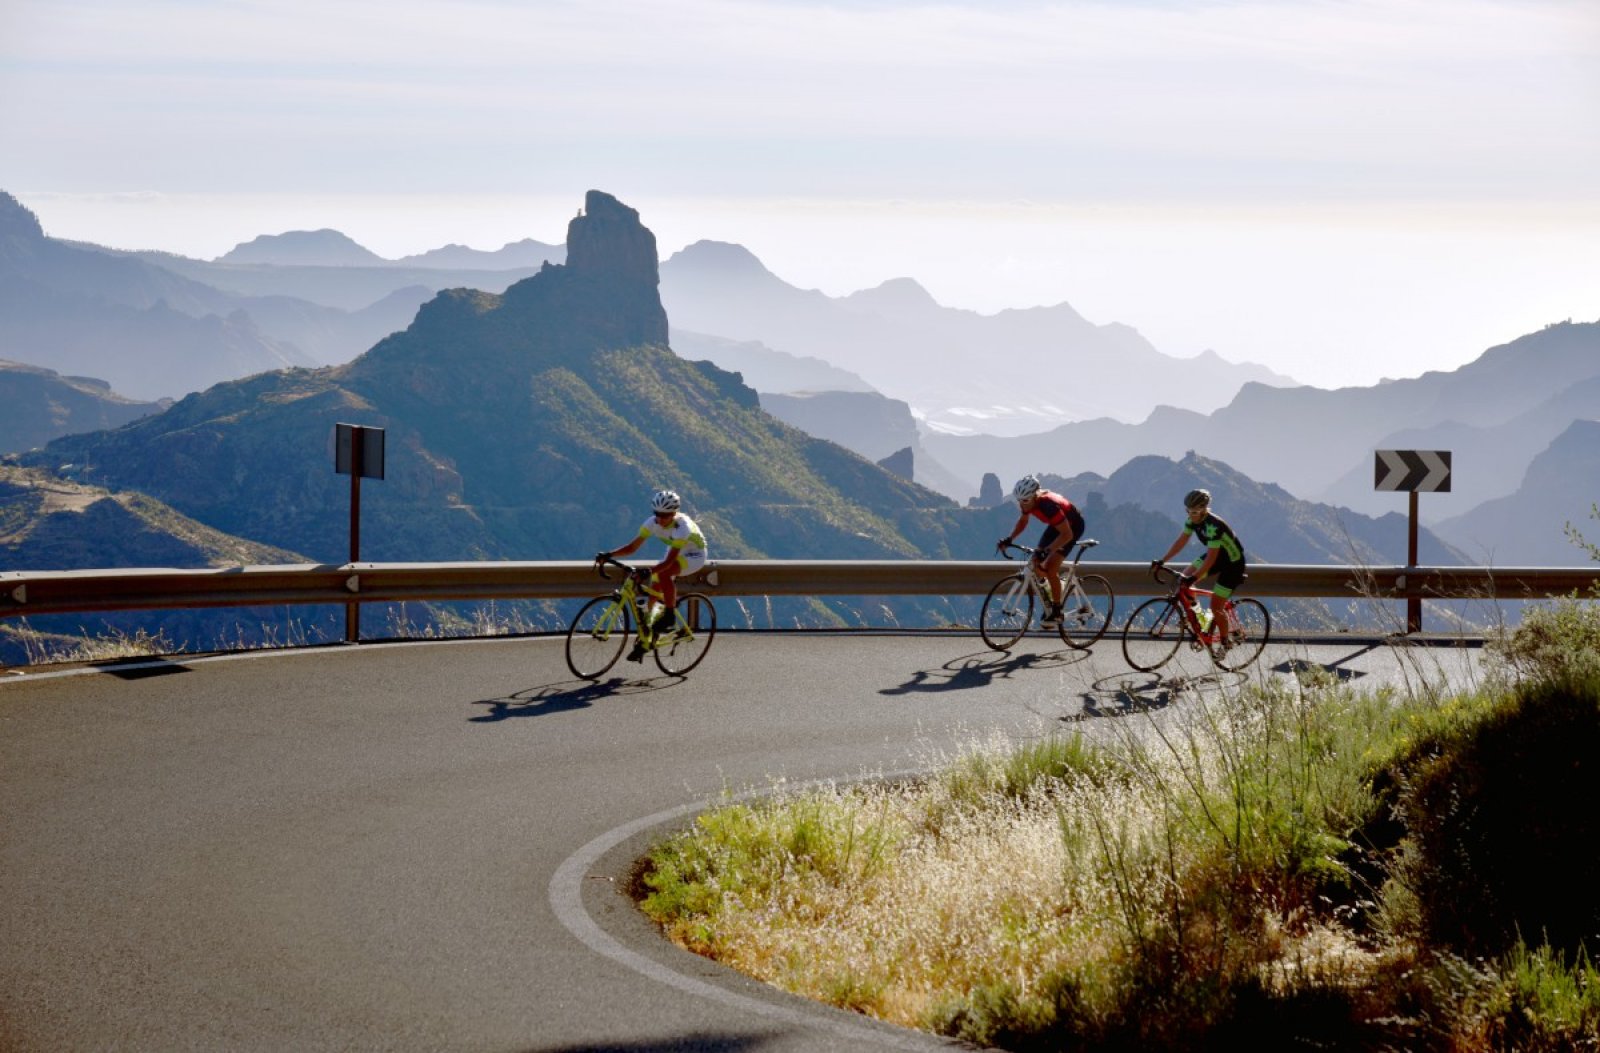 We organize bike tours and bicycle vacations